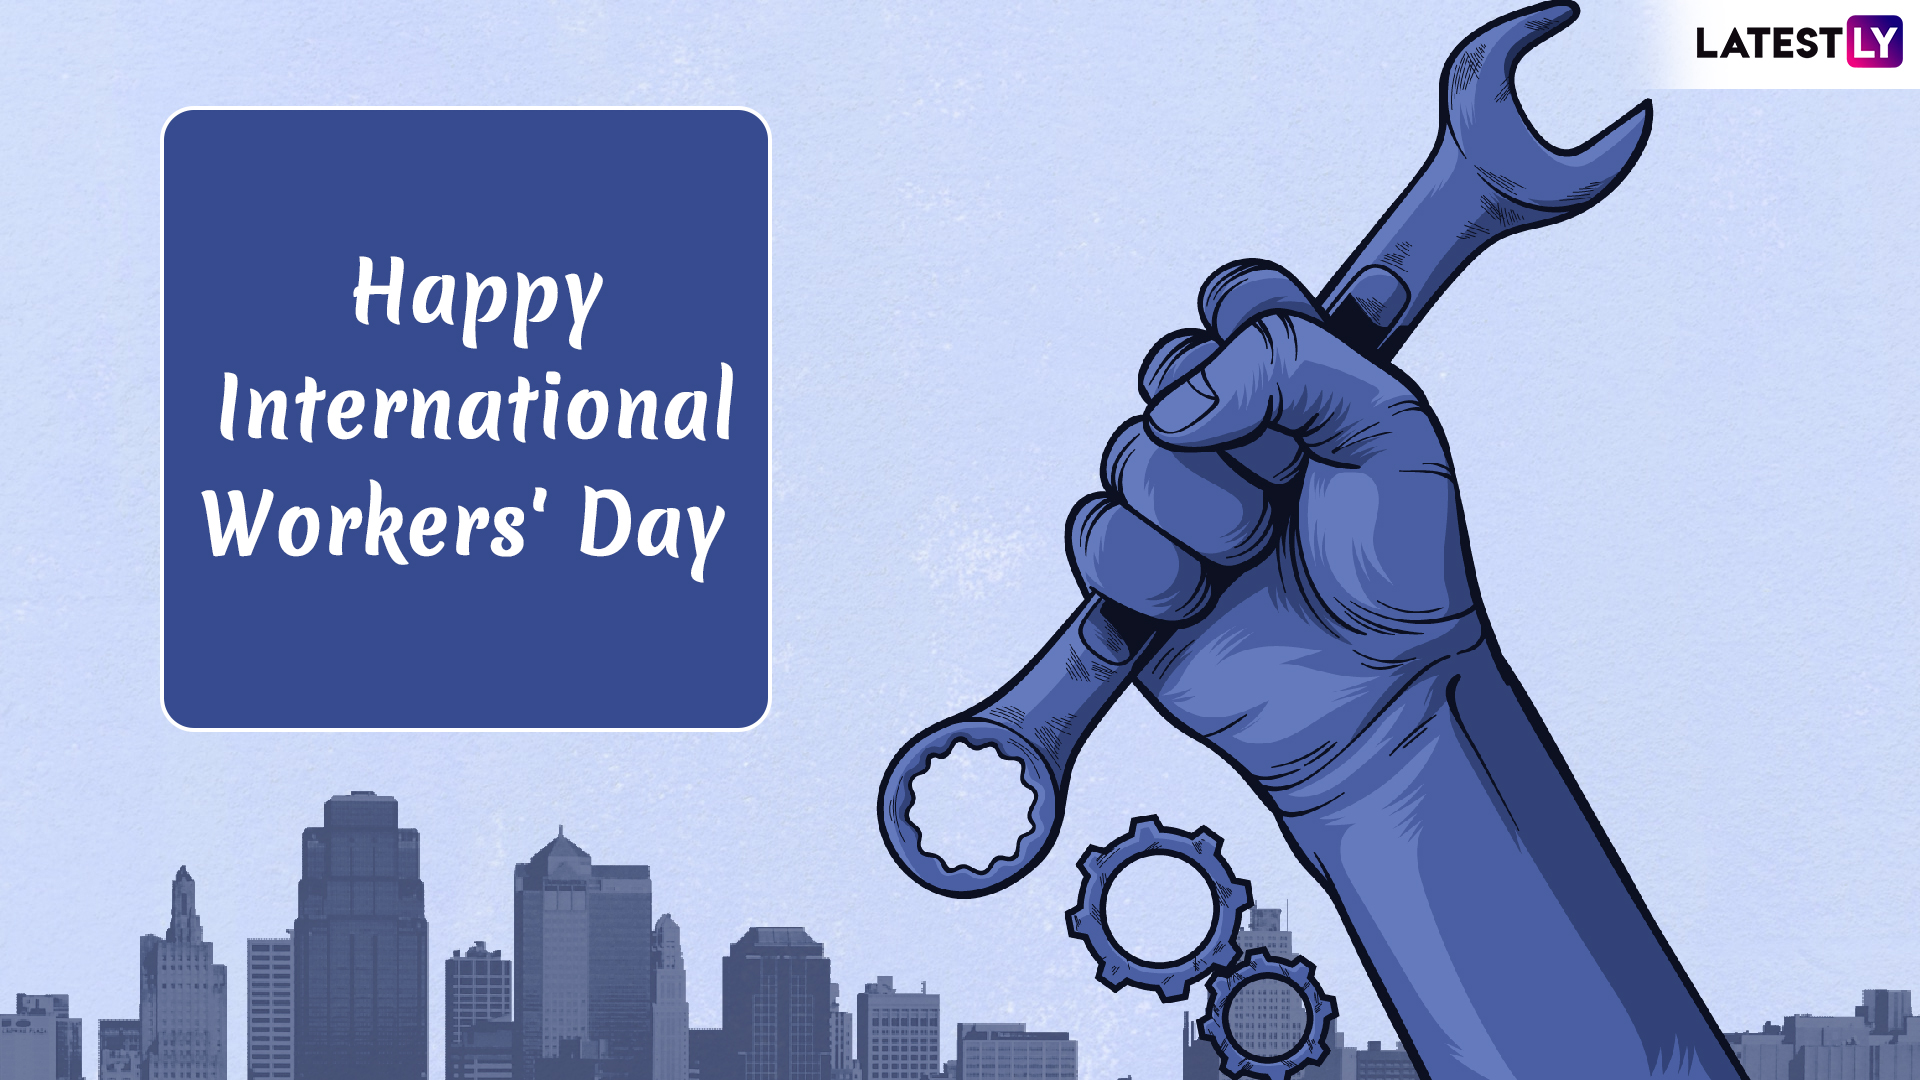 International Workers' Day Quotes Labour Day 2020 Wishes, messages